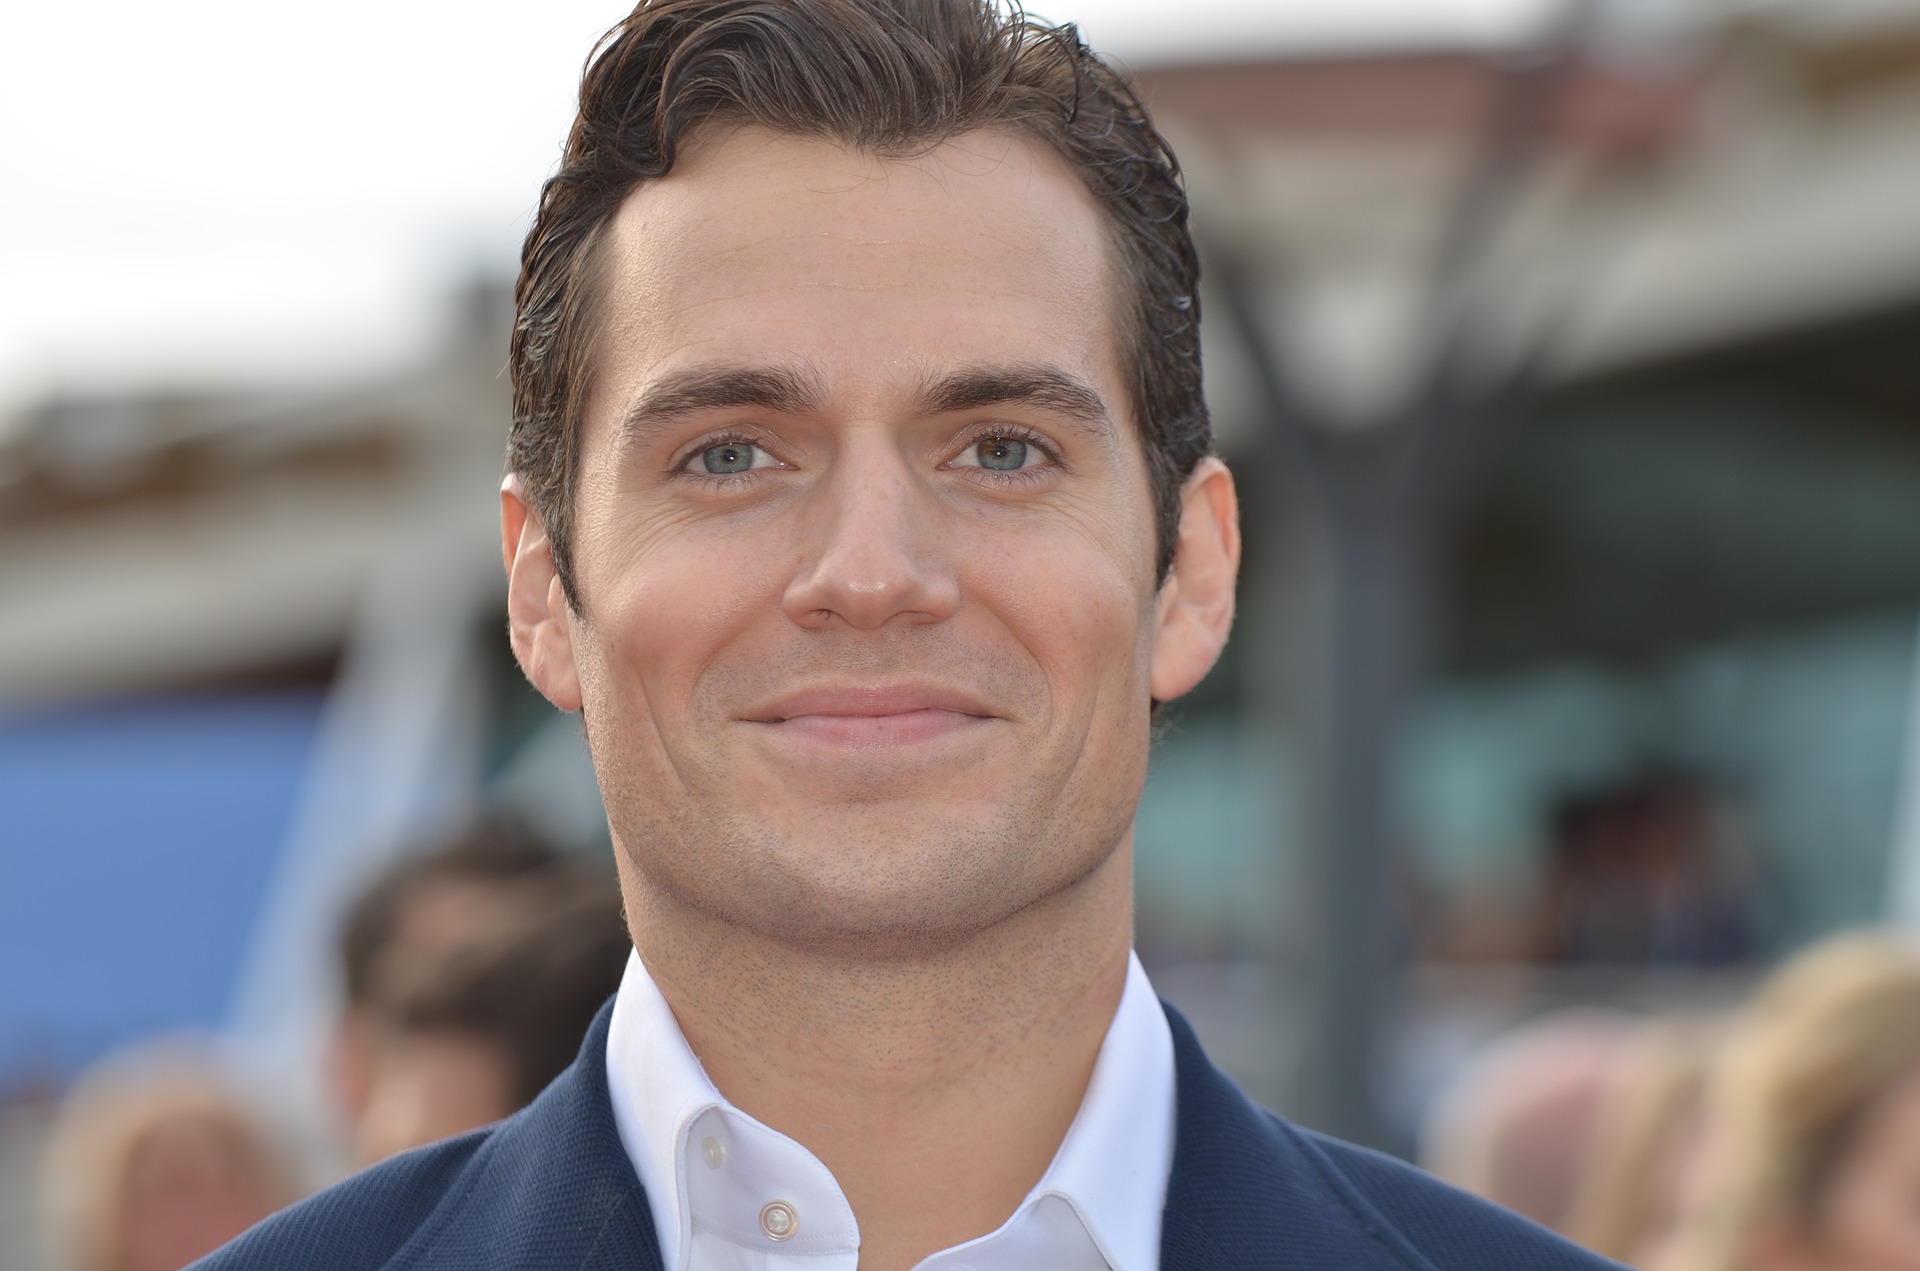 Man of Steel 2: Henry Cavill Hangs Up His Cape as Superman as James Gunn  Announces Reboot for New DC Universe